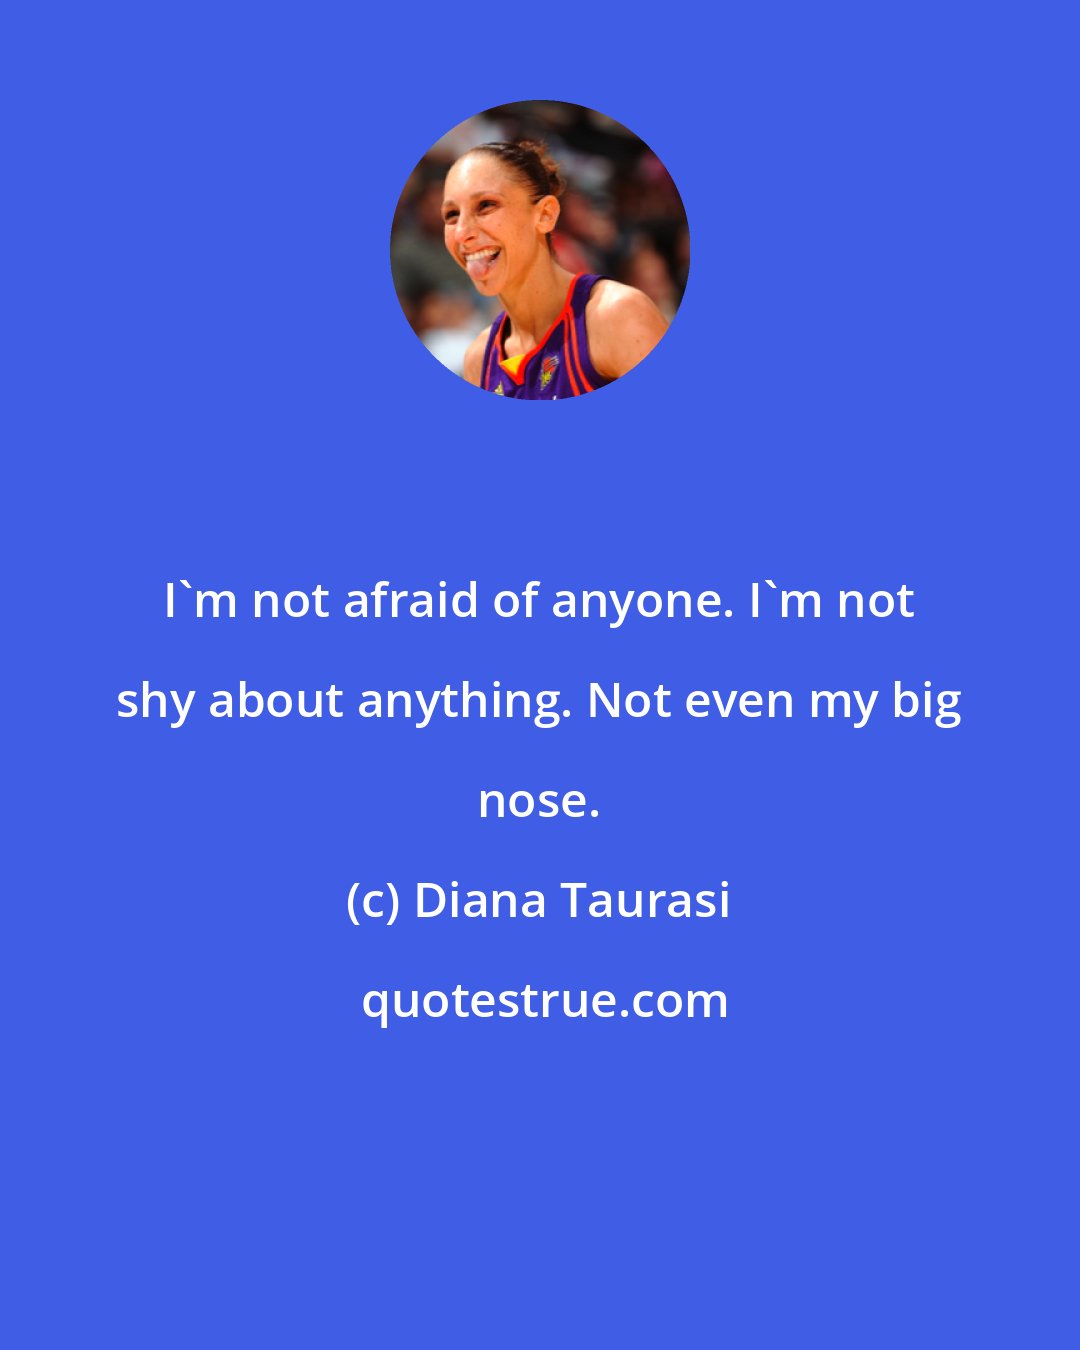 Diana Taurasi: I'm not afraid of anyone. I'm not shy about anything. Not even my big nose.